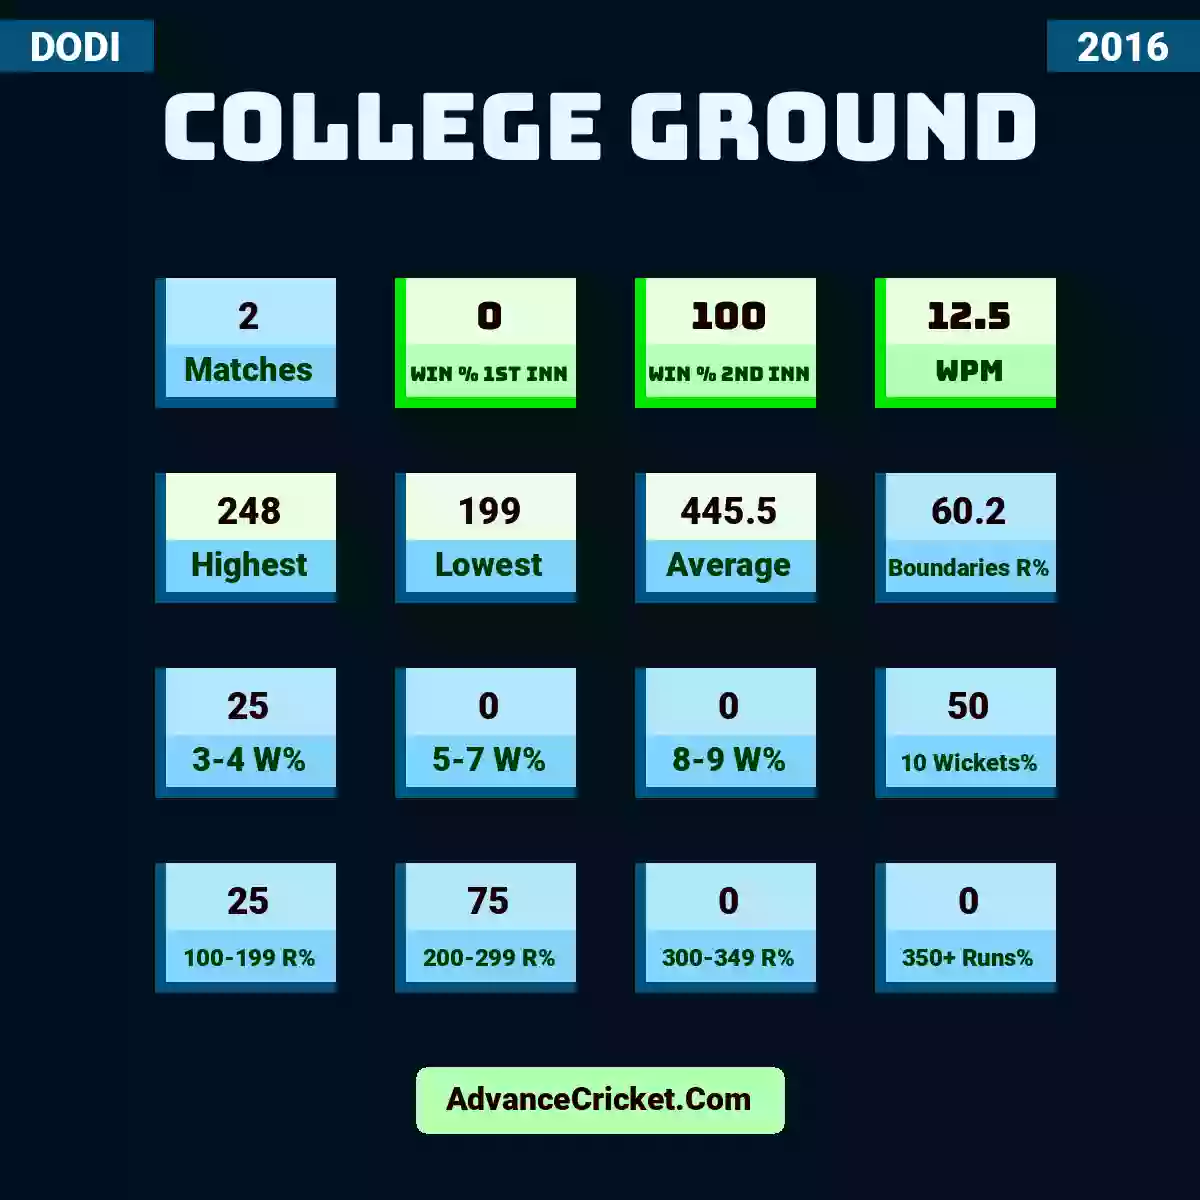 Image showing College Ground with Matches: 2, Win % 1st Inn: 0, Win % 2nd Inn: 100, WPM: 12.5, Highest: 248, Lowest: 199, Average: 445.5, Boundaries R%: 60.2, 3-4 W%: 25, 5-7 W%: 0, 8-9 W%: 0, 10 Wickets%: 50, 100-199 R%: 25, 200-299 R%: 75, 300-349 R%: 0, 350+ Runs%: 0.